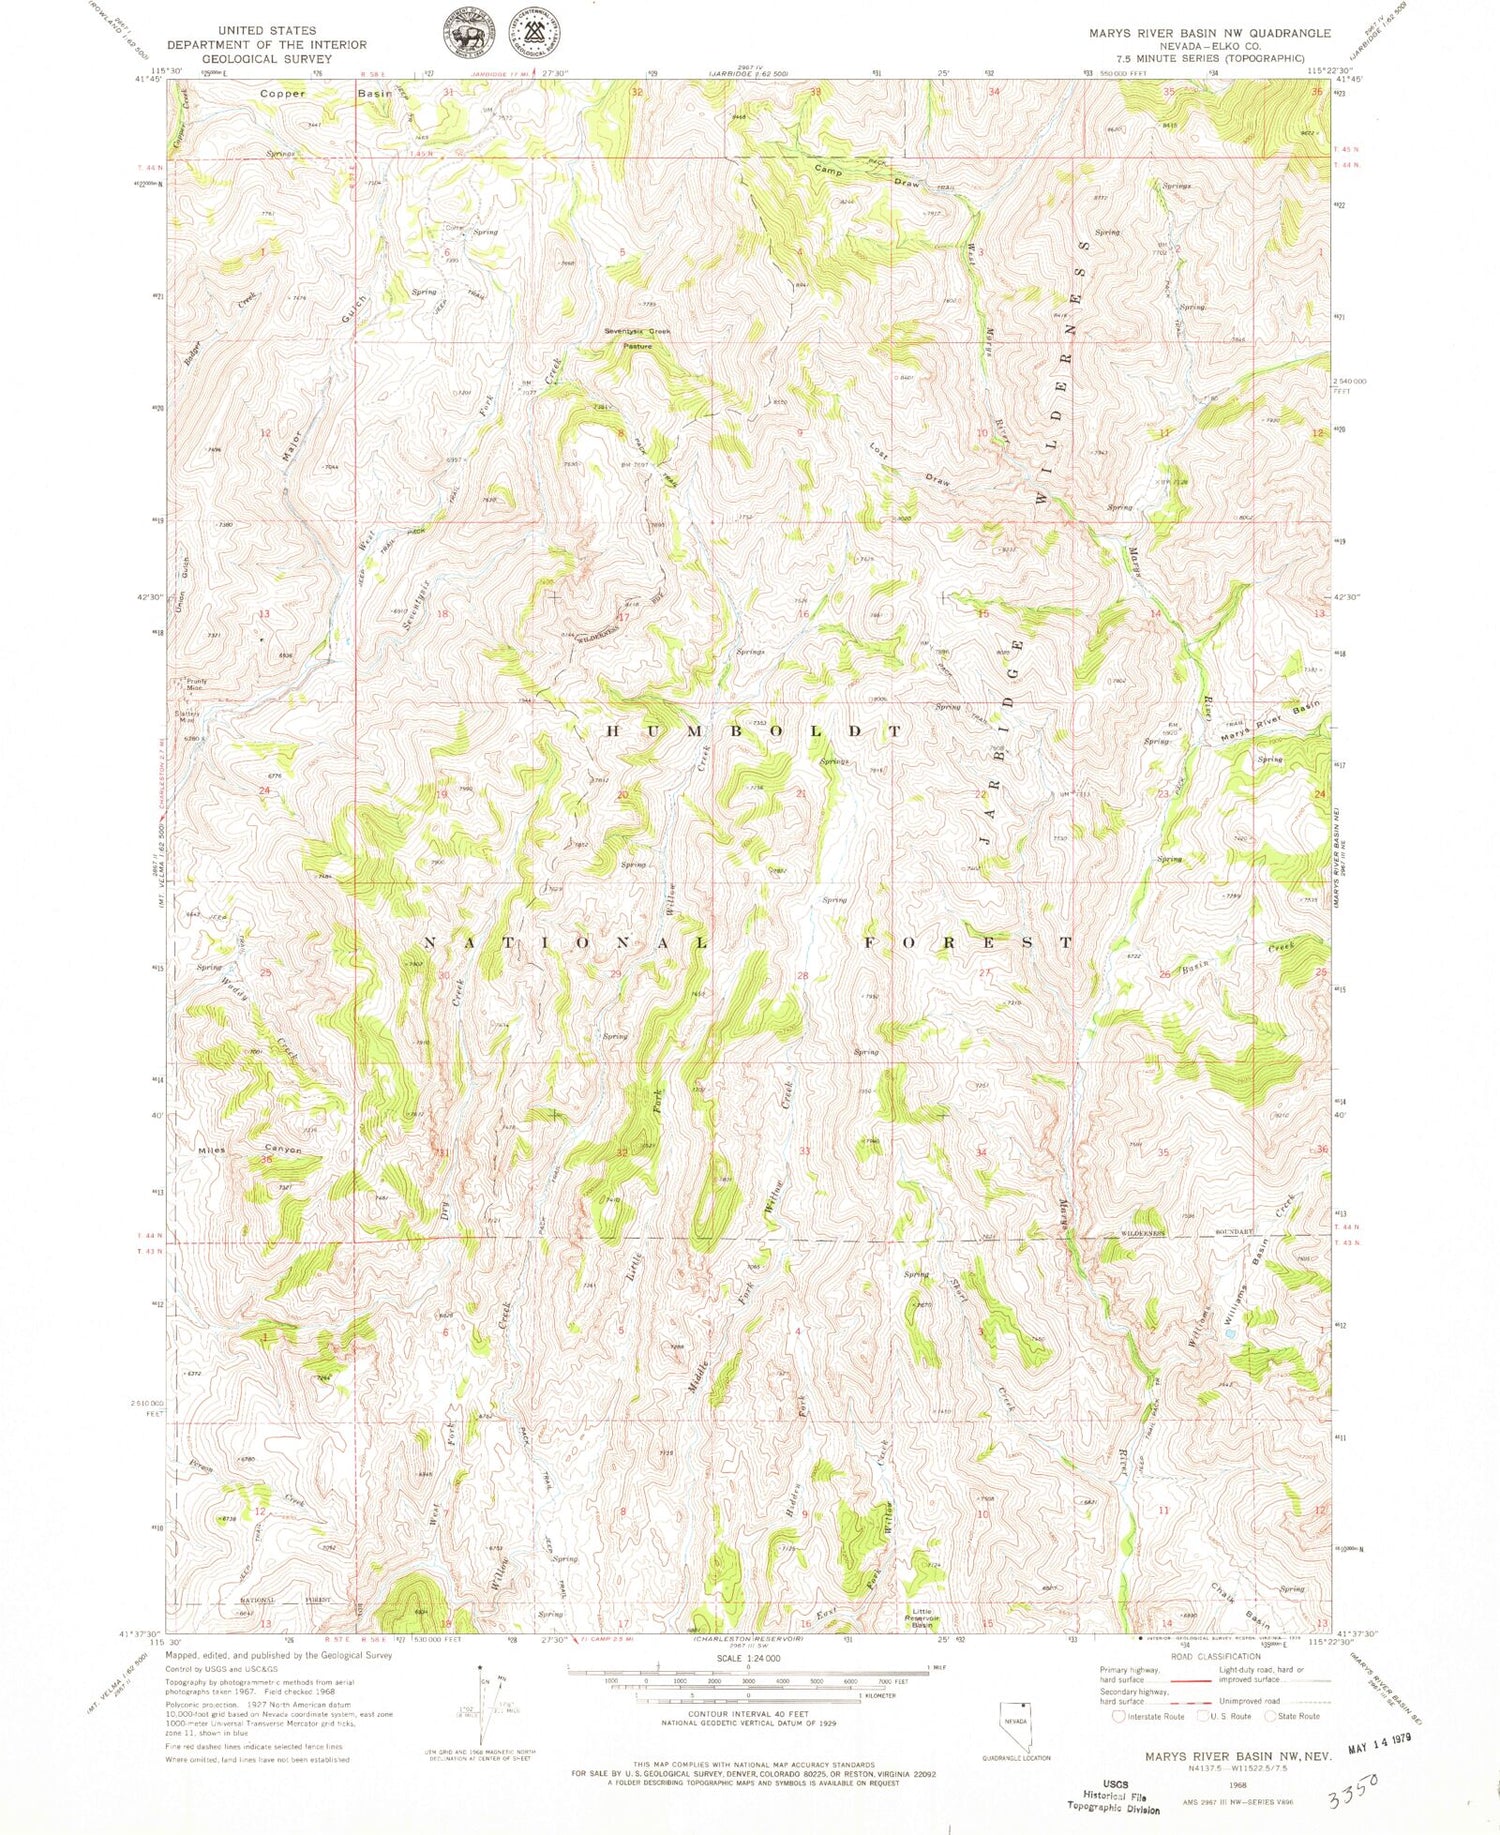 Classic USGS Marys River Basin NW Nevada 7.5'x7.5' Topo Map Image